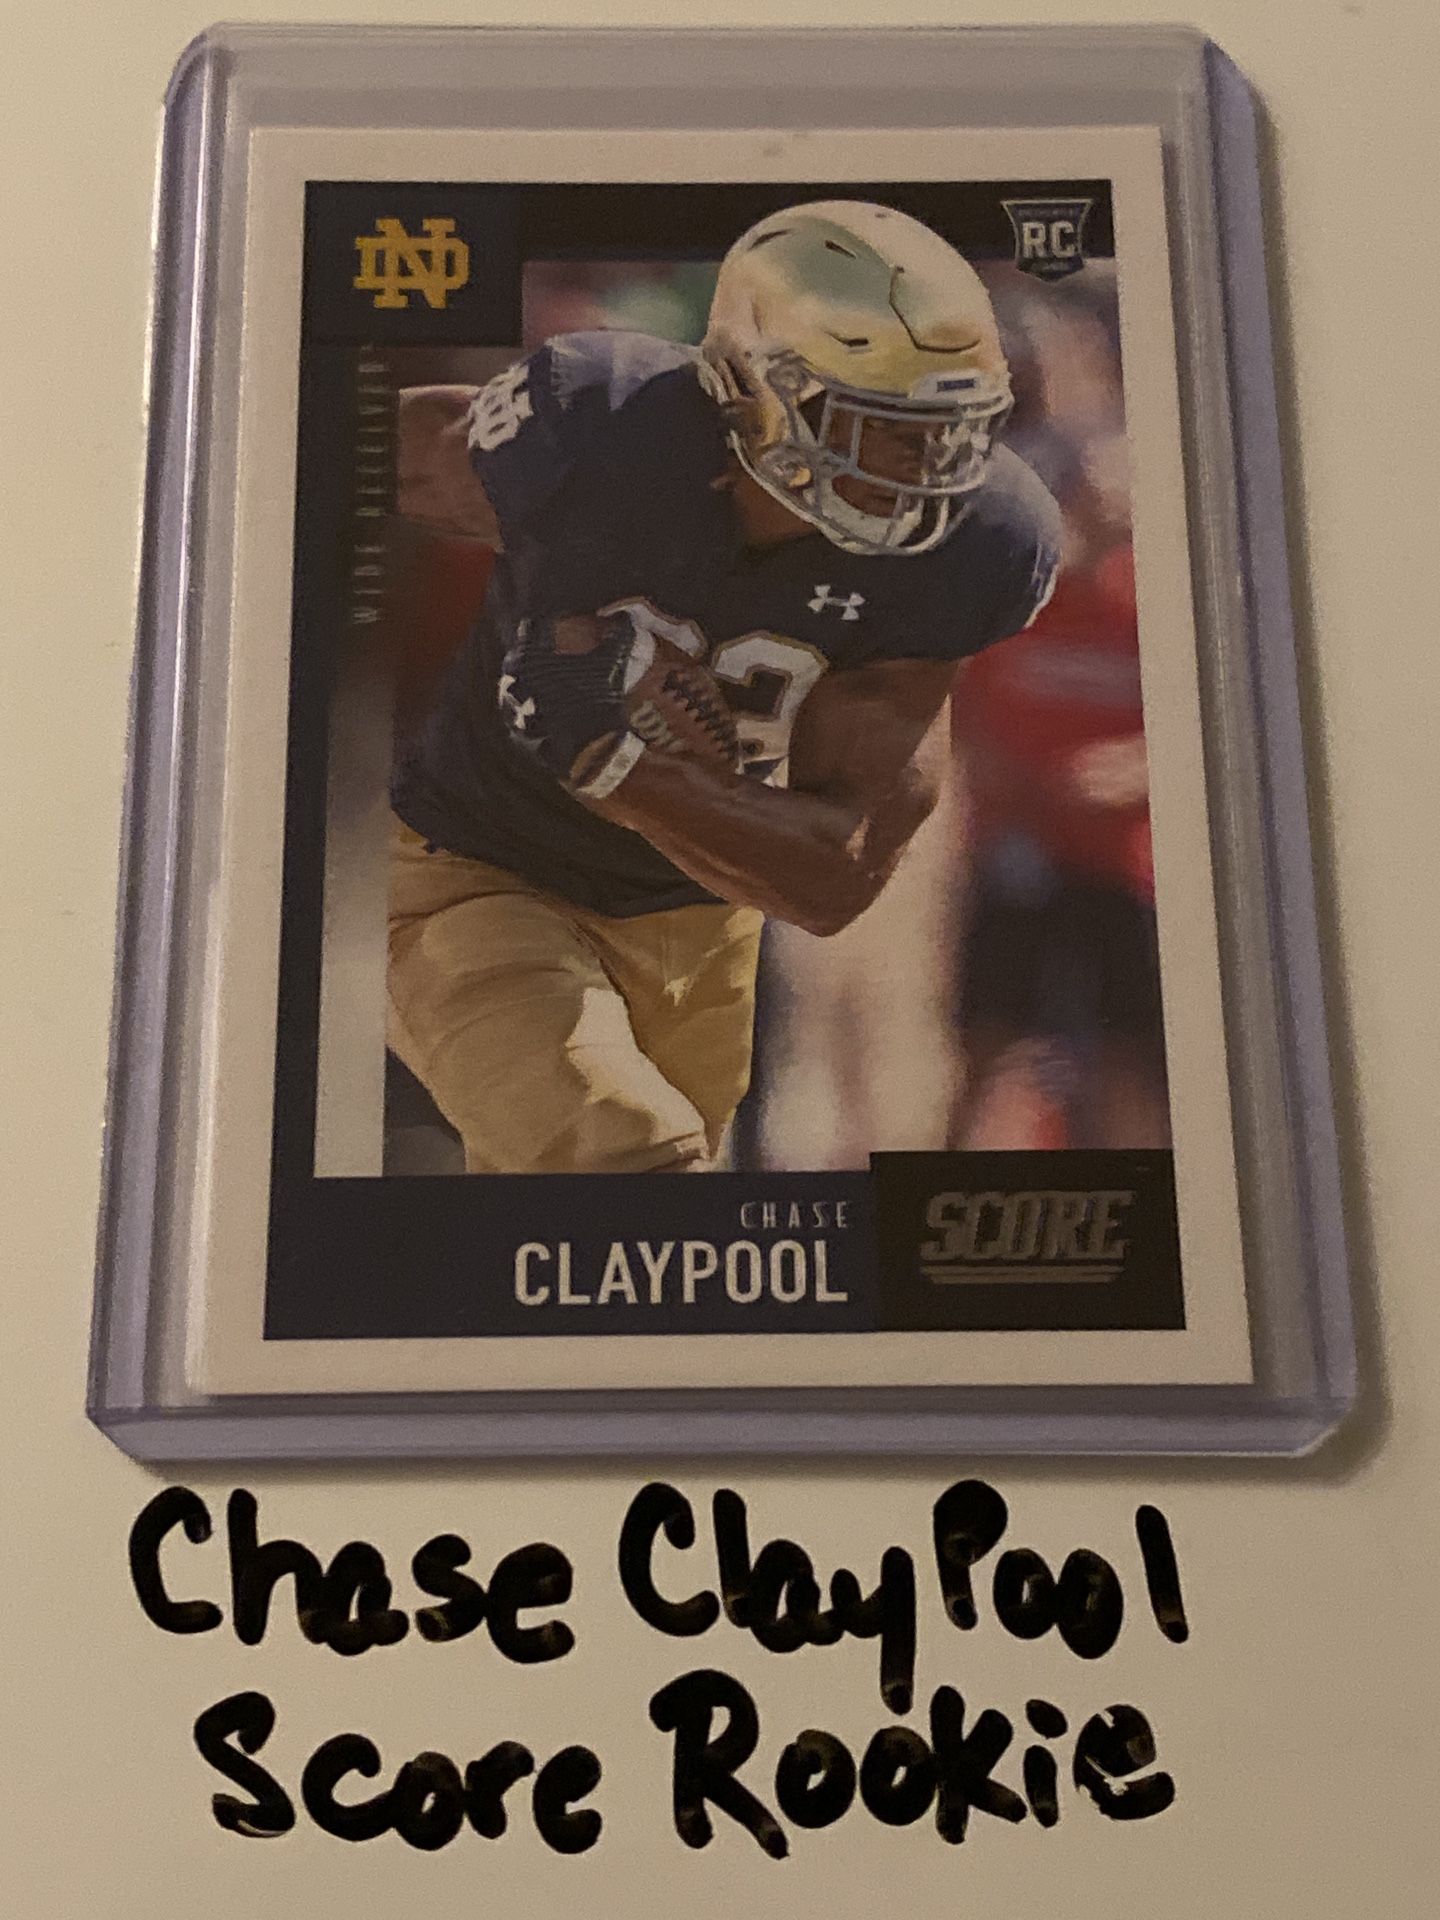 Chase Claypool Pittsburgh Steelers WR Score Base Rookie Card.